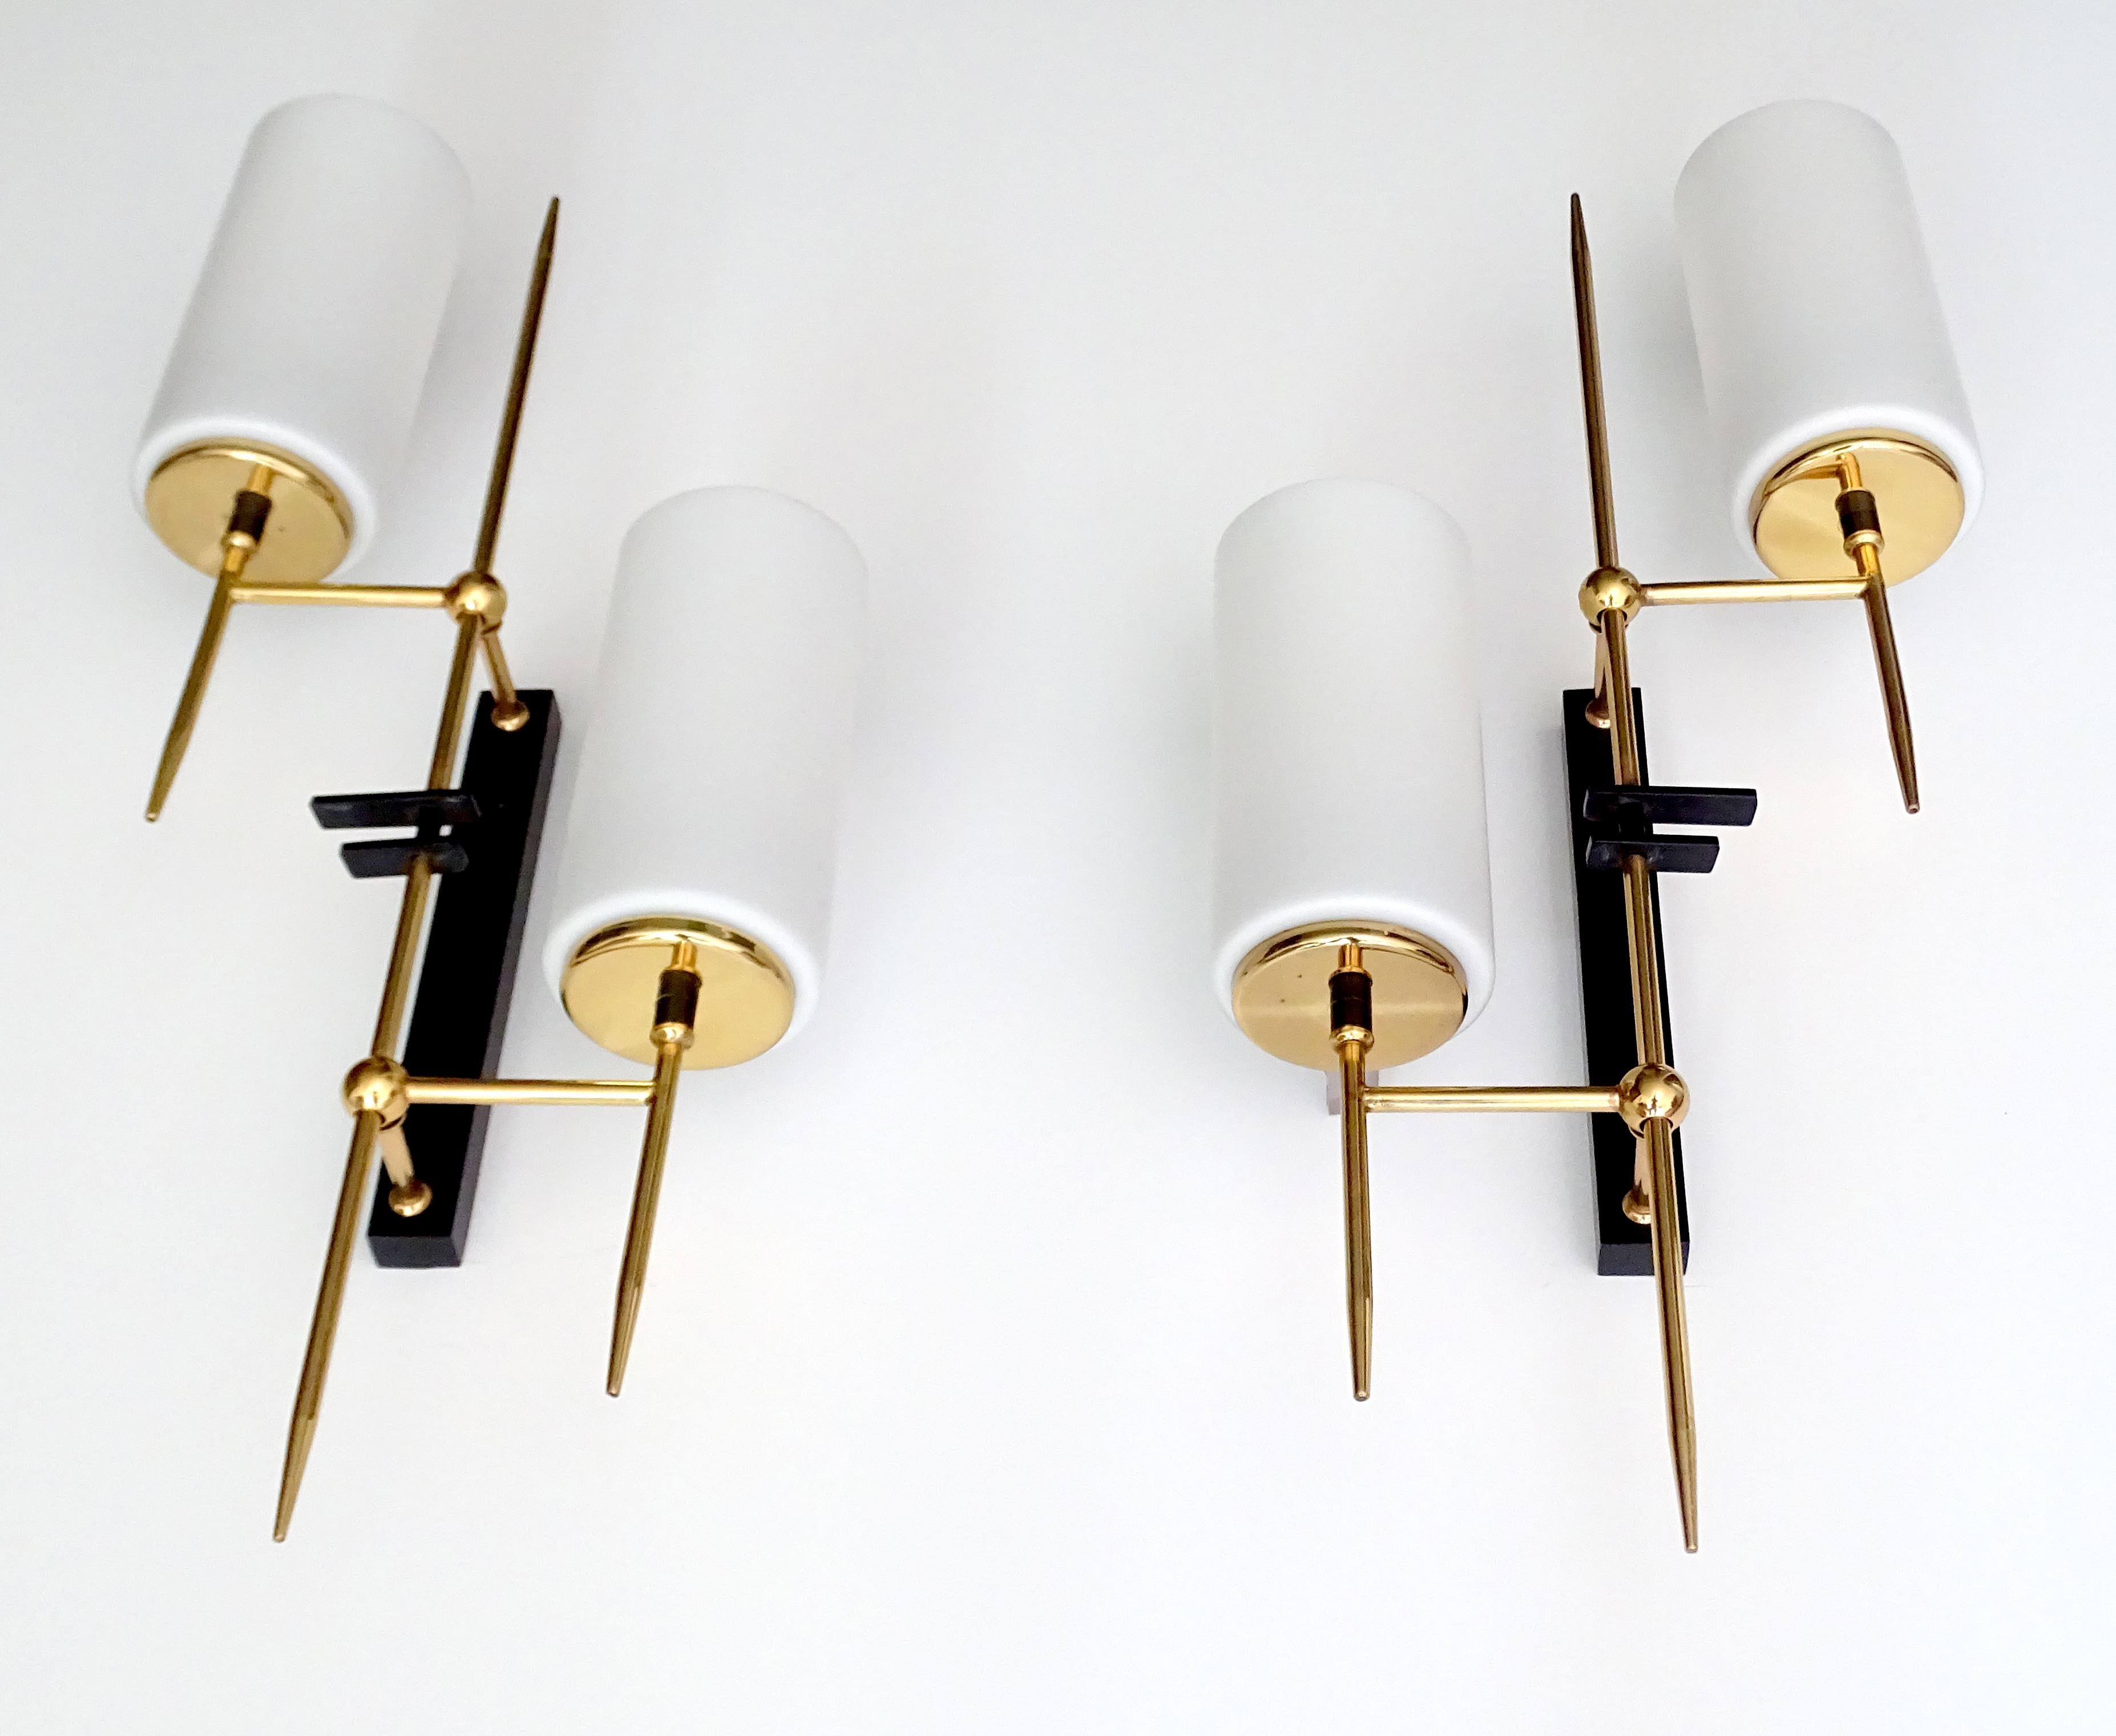 Exceptional  Pair of Large Brass Glass Sconces, France, 1960s, Stilnovo Style For Sale 5